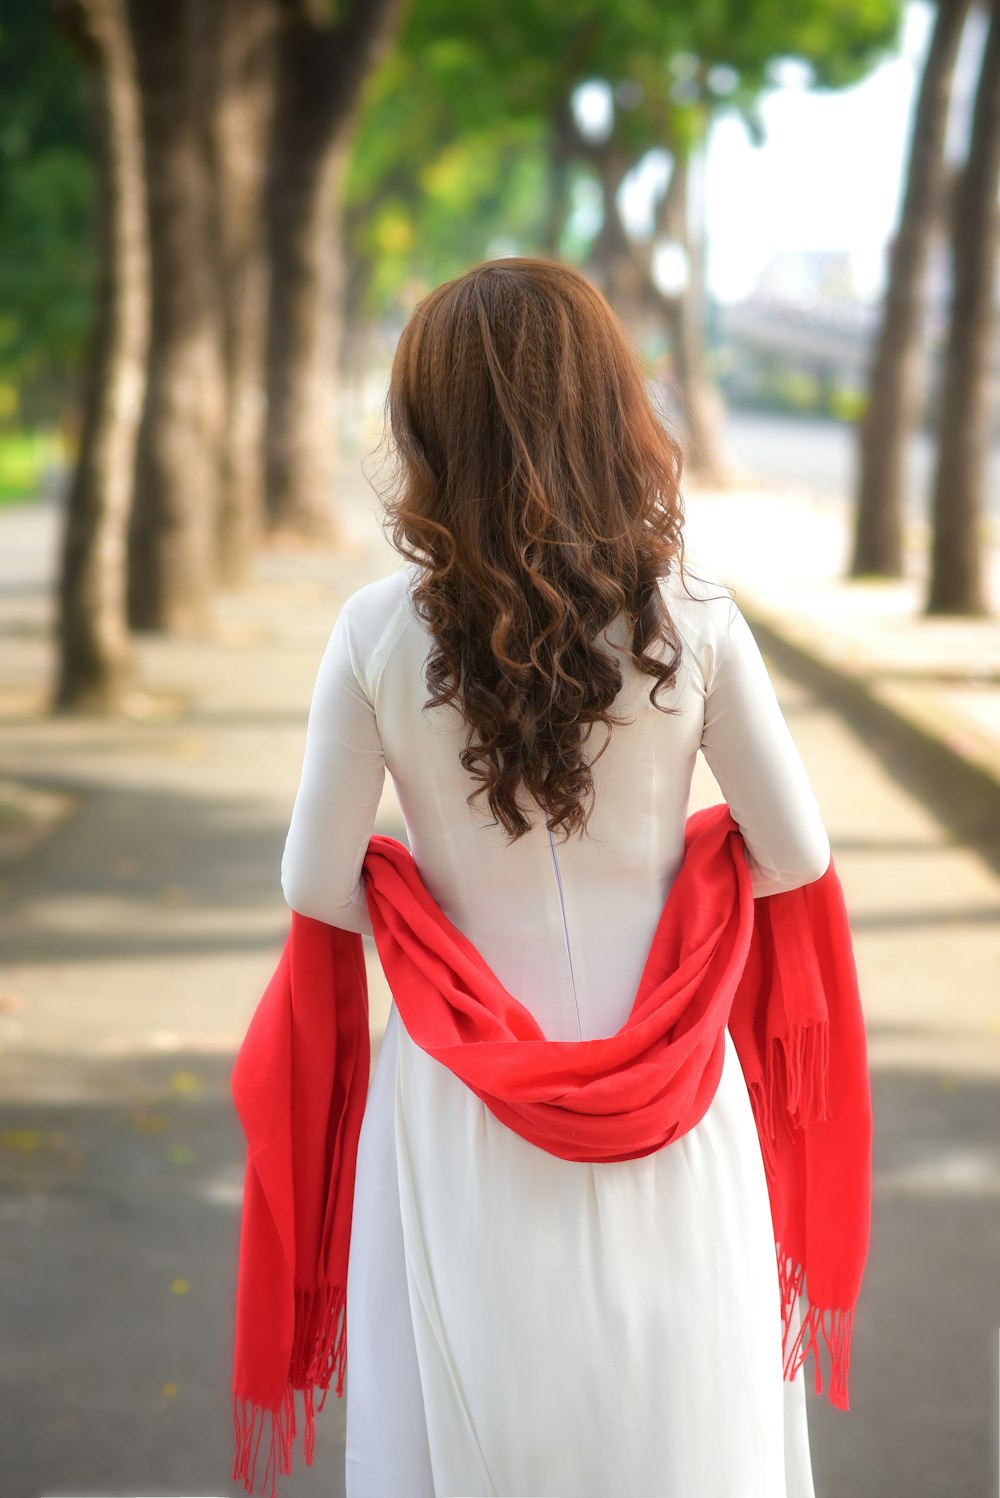 woman in white long sleeve shirt and red scarf standing on road during daytime